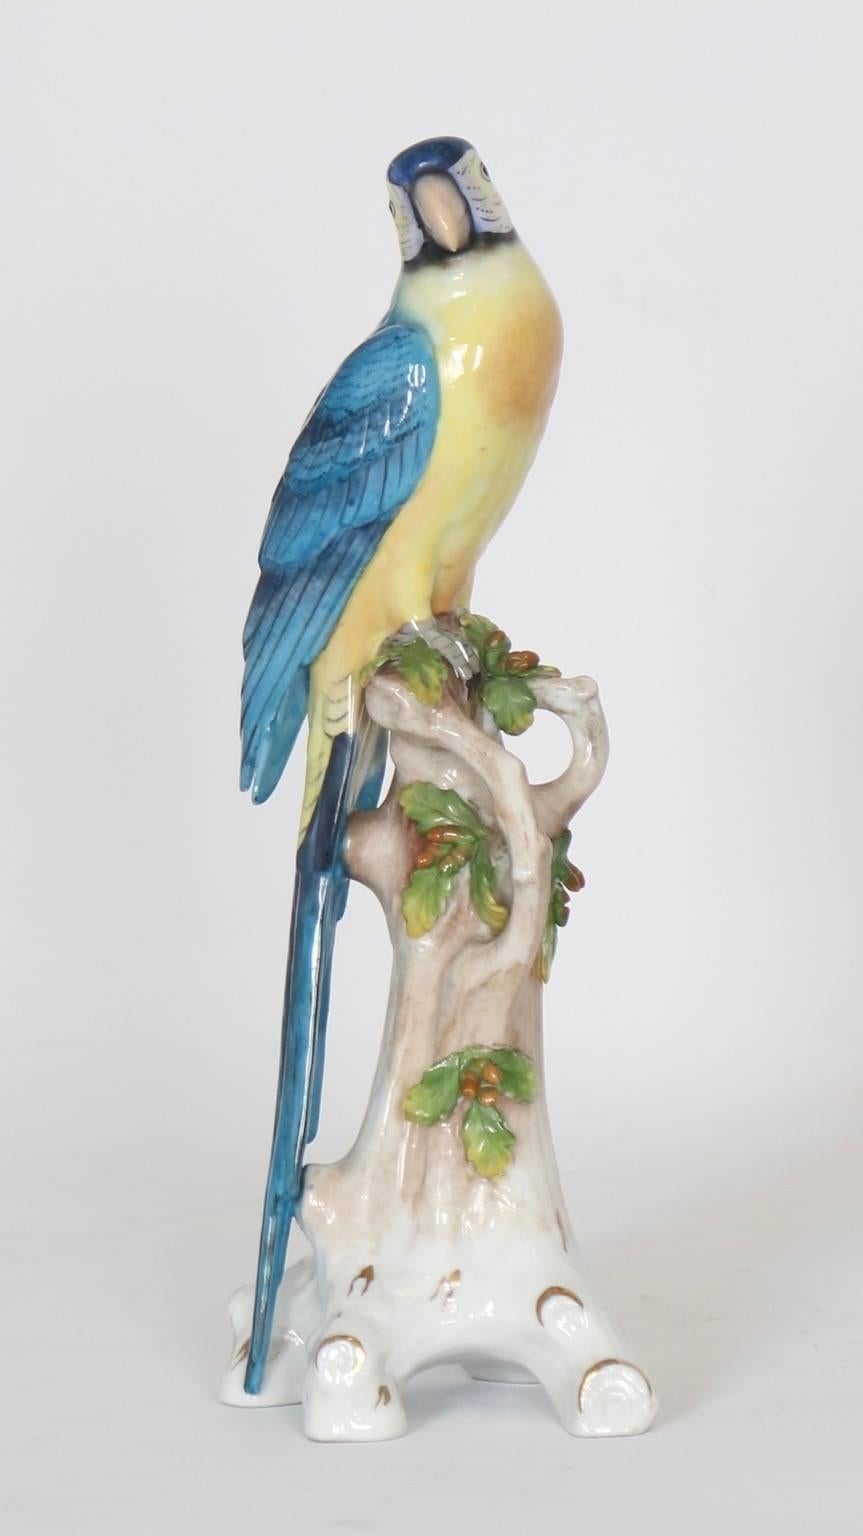 Porcelain parrot by Chelsea house marked with the gold anchor period (1756-1769). Manufactured in England, the parrot is perched on a branch and features tones of yellow and blue. This piece is in excellent vintage condition having wear consistent